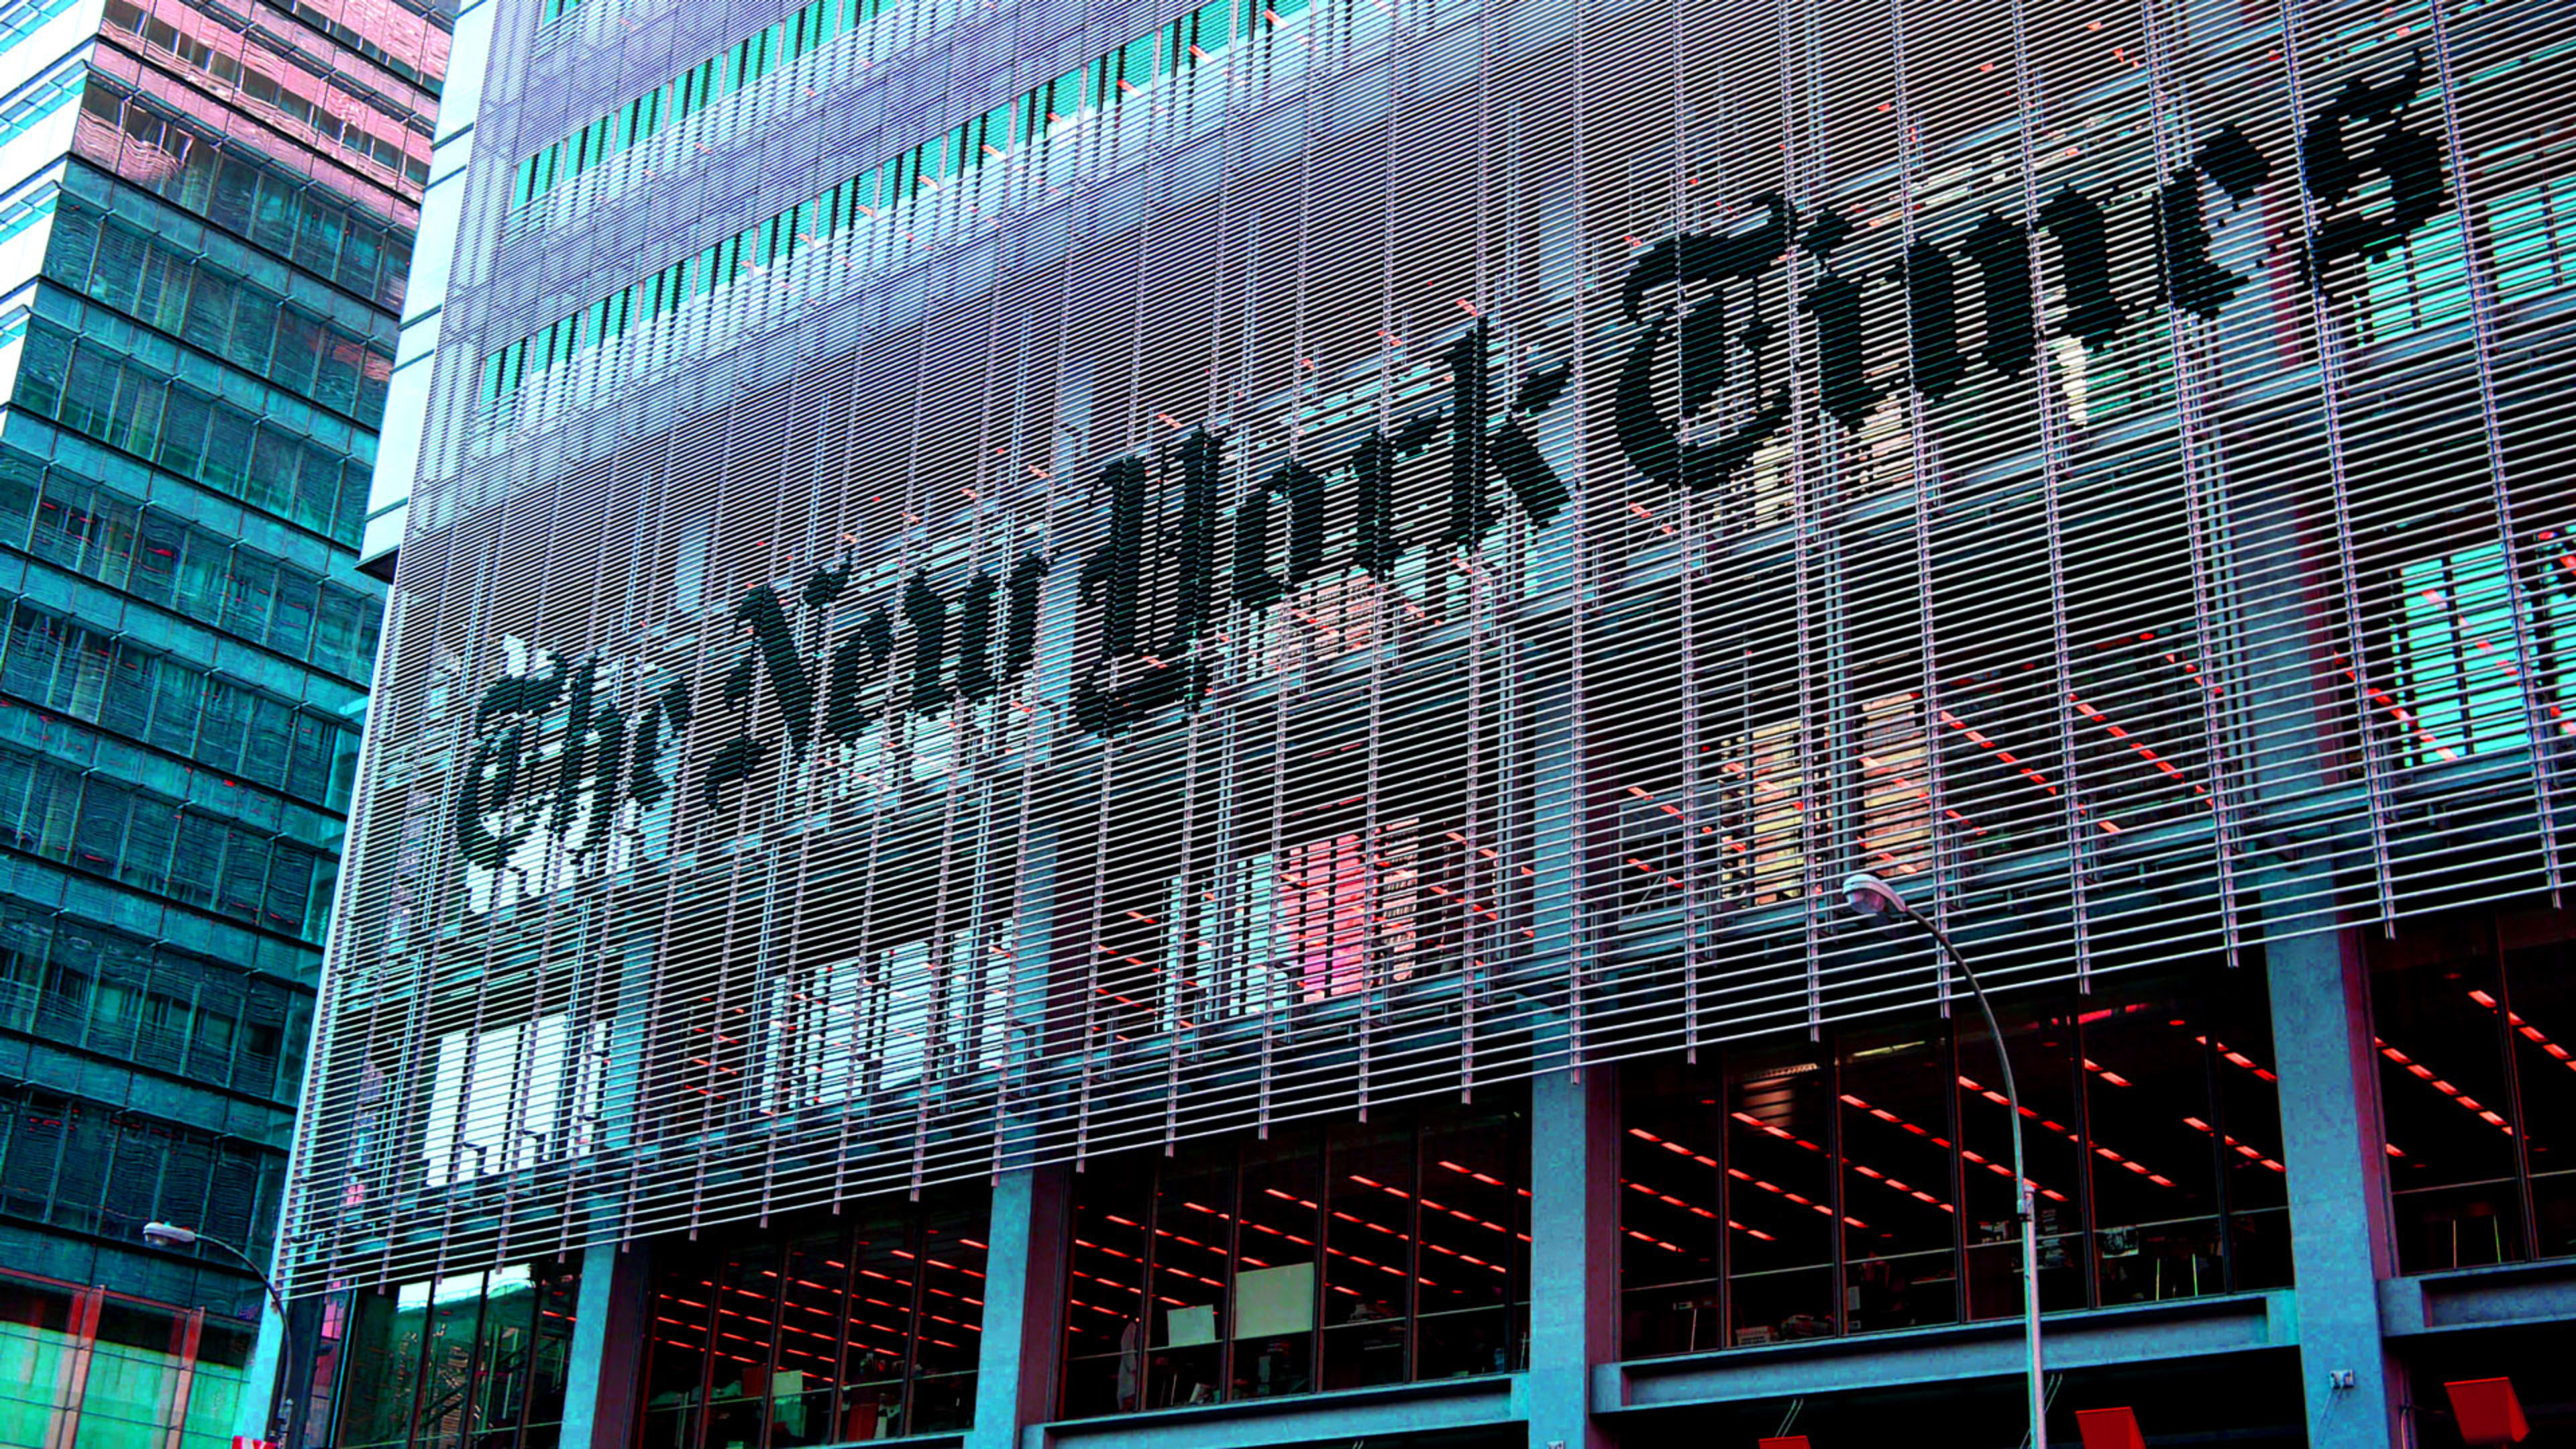 Fox News and the New York Times led Facebook engagement last month